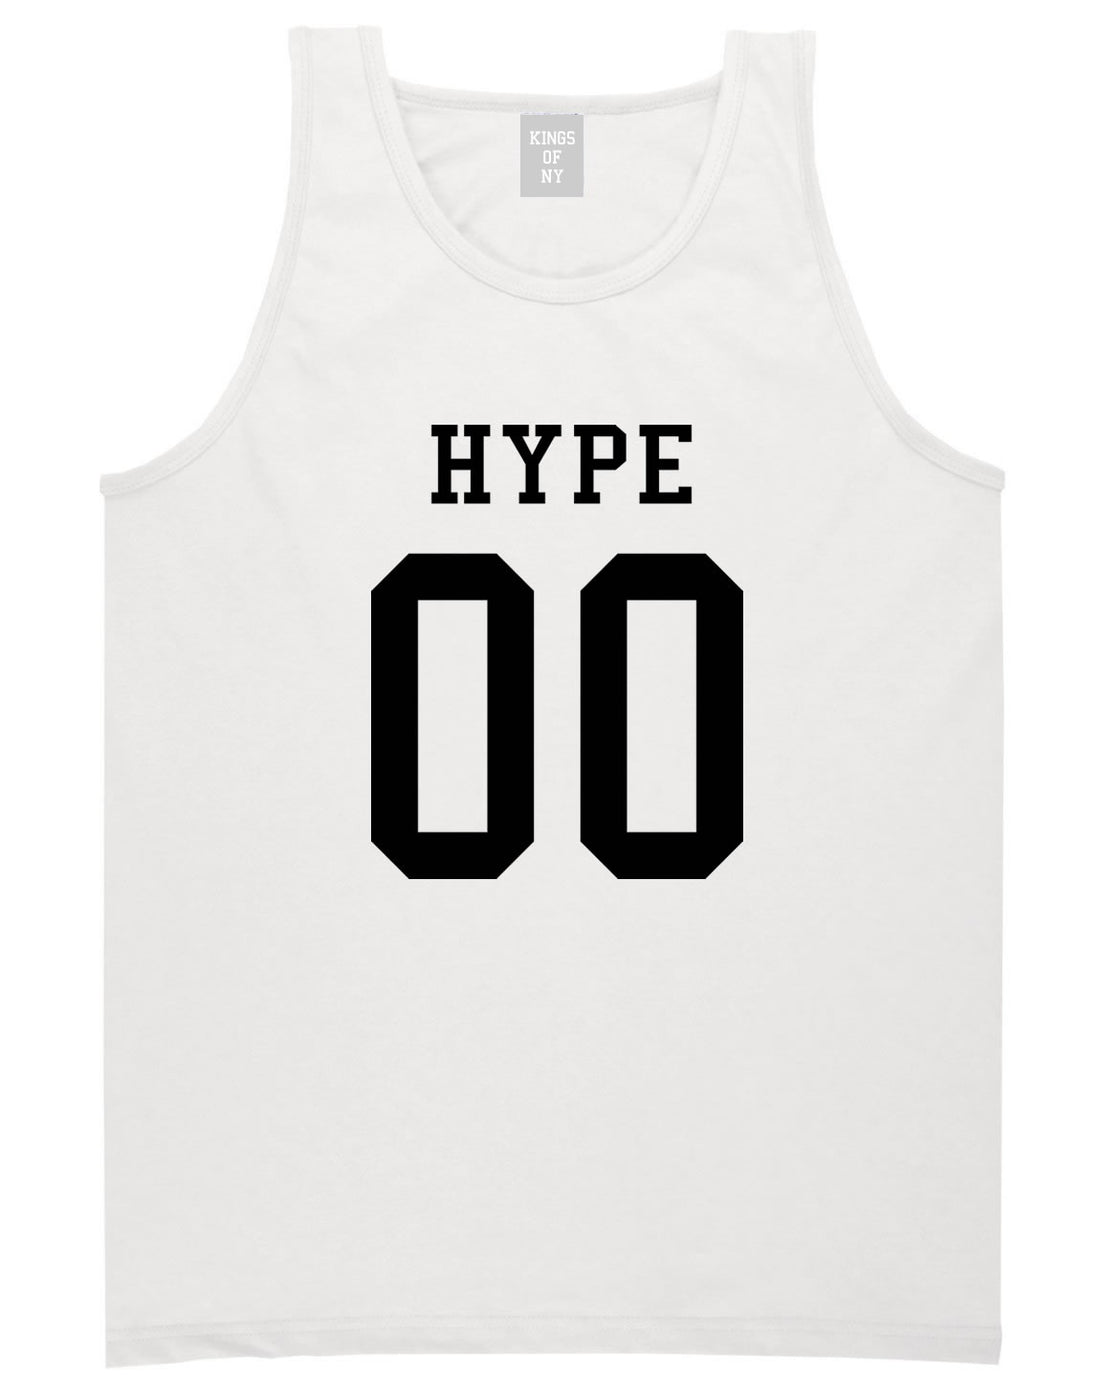 Hype Team Jersey Tank Top in White By Kings Of NY